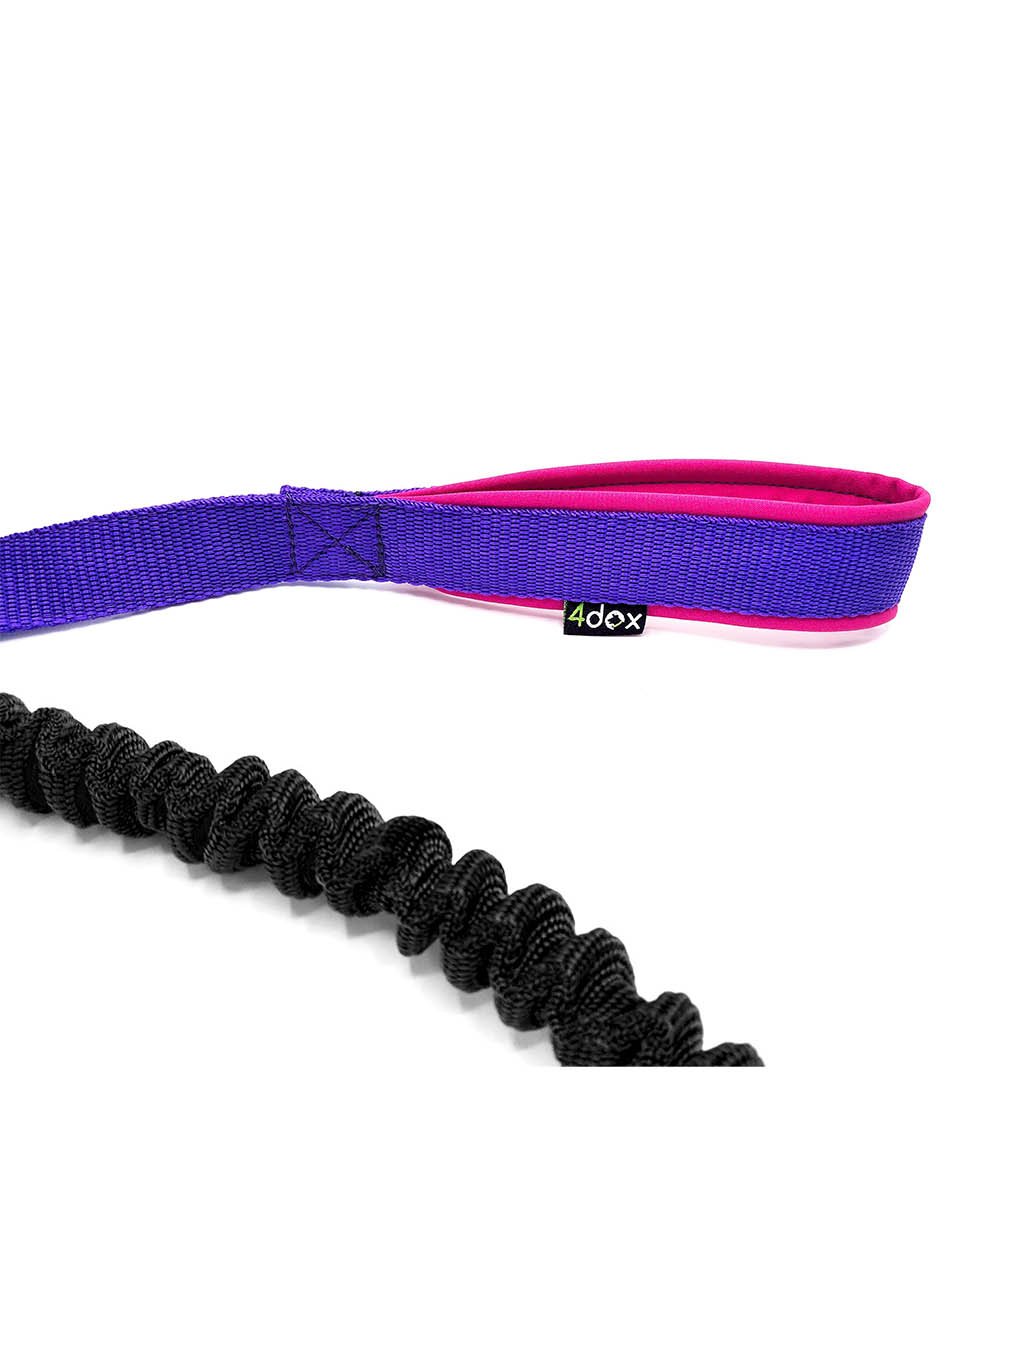 Leash with a shock absorber PURPLE-BLACK